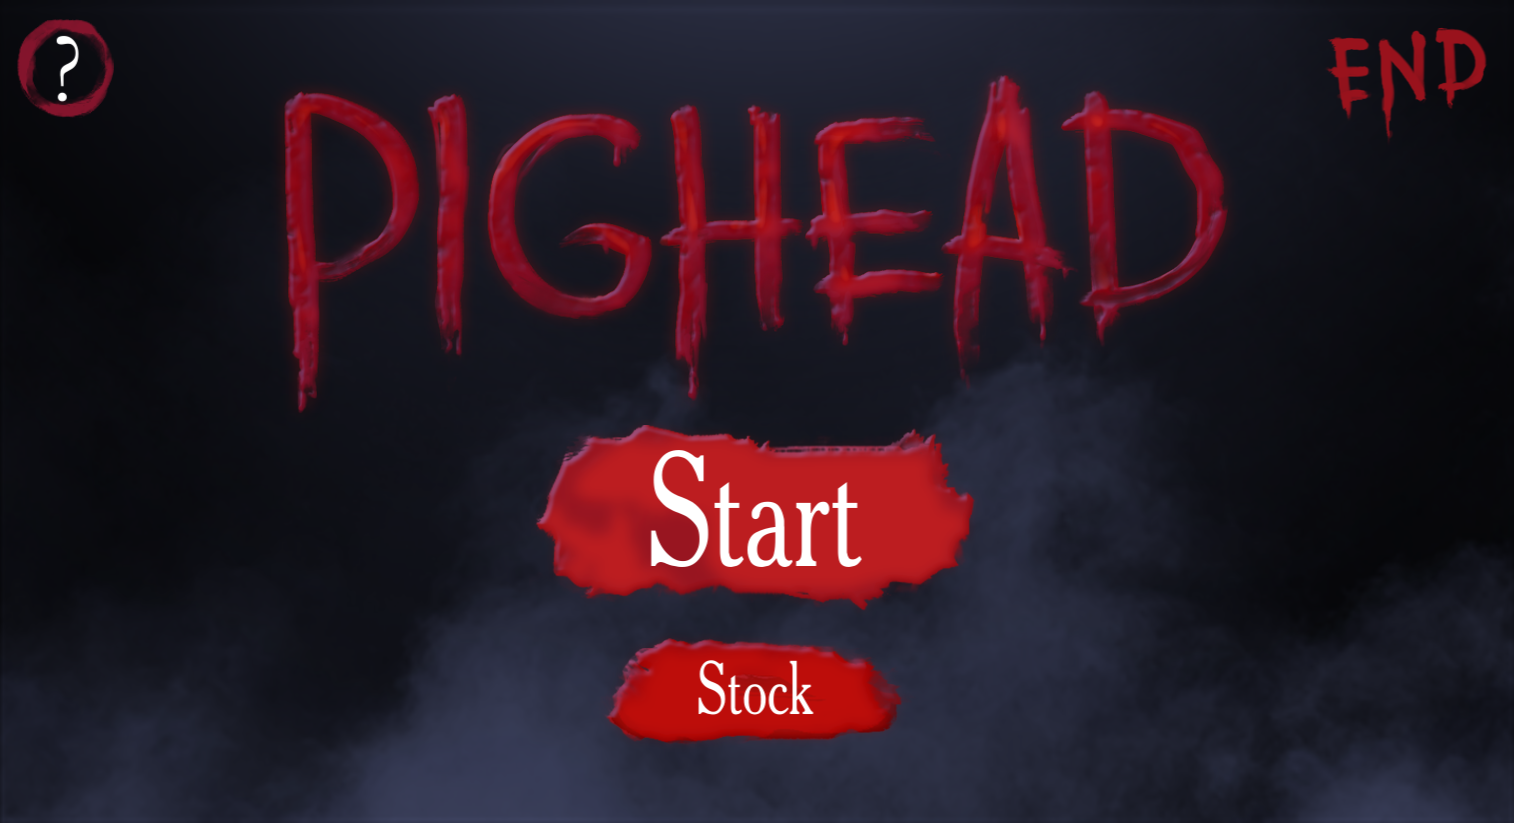 Pighead maniac (Night horror) for Android